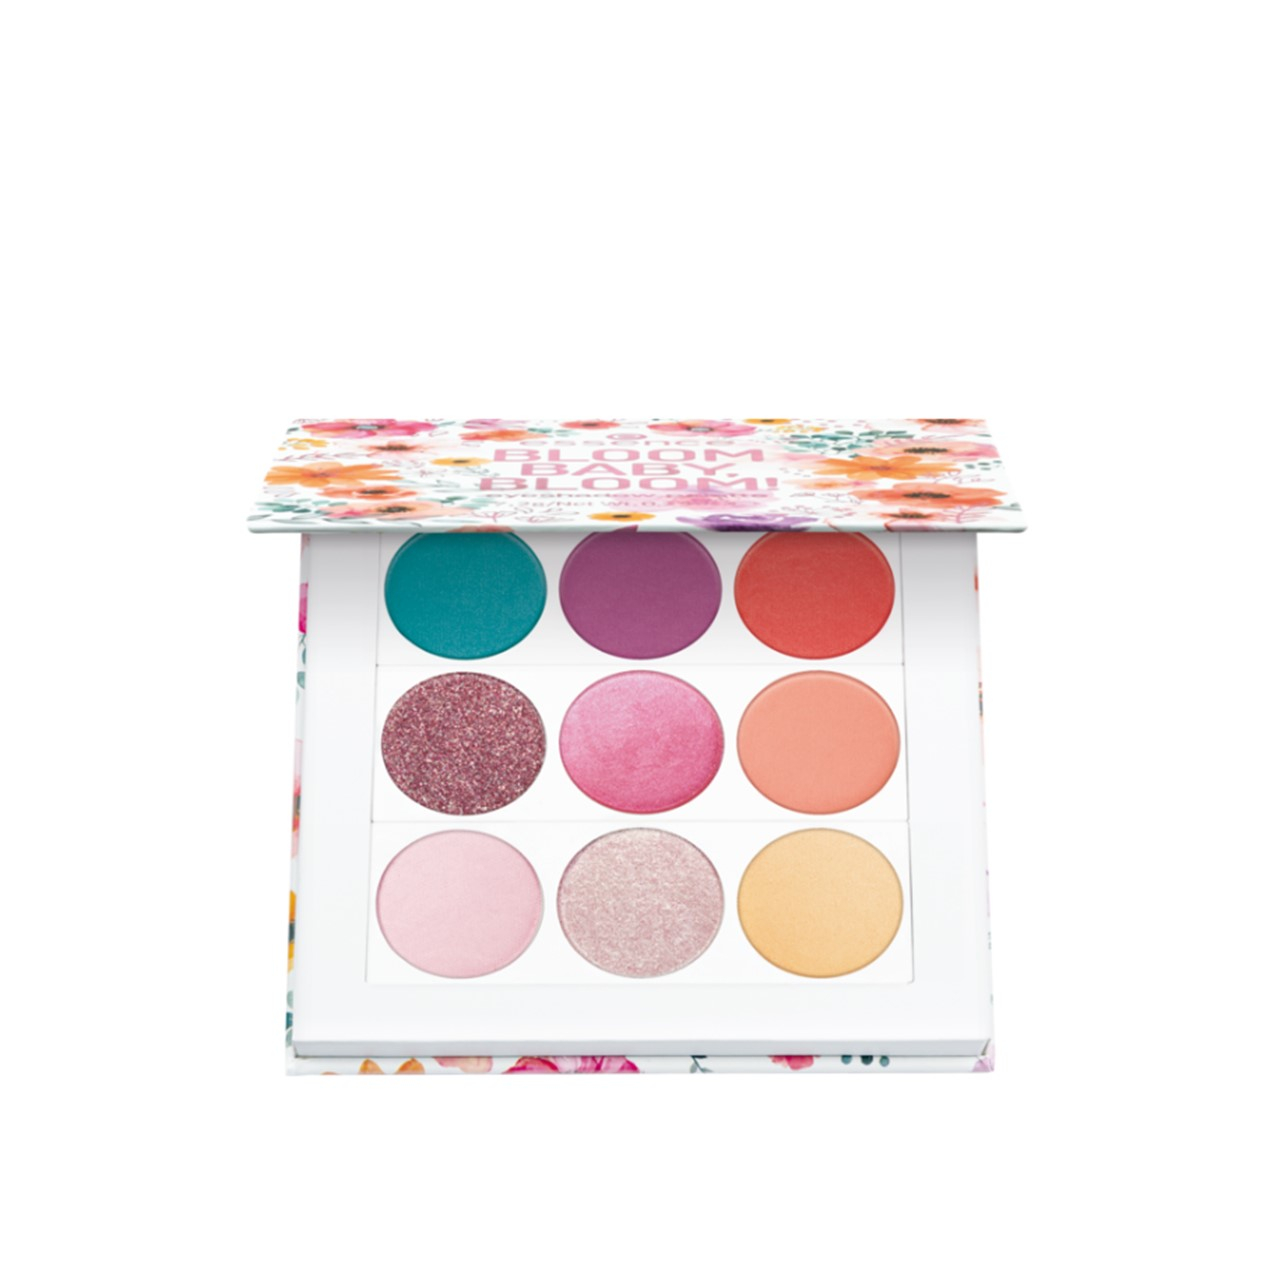 Me! Shadow On Palette Buy Baby 7.2g (0.25oz) Bloom · essence Poppy-ng Colours USA Bloom!